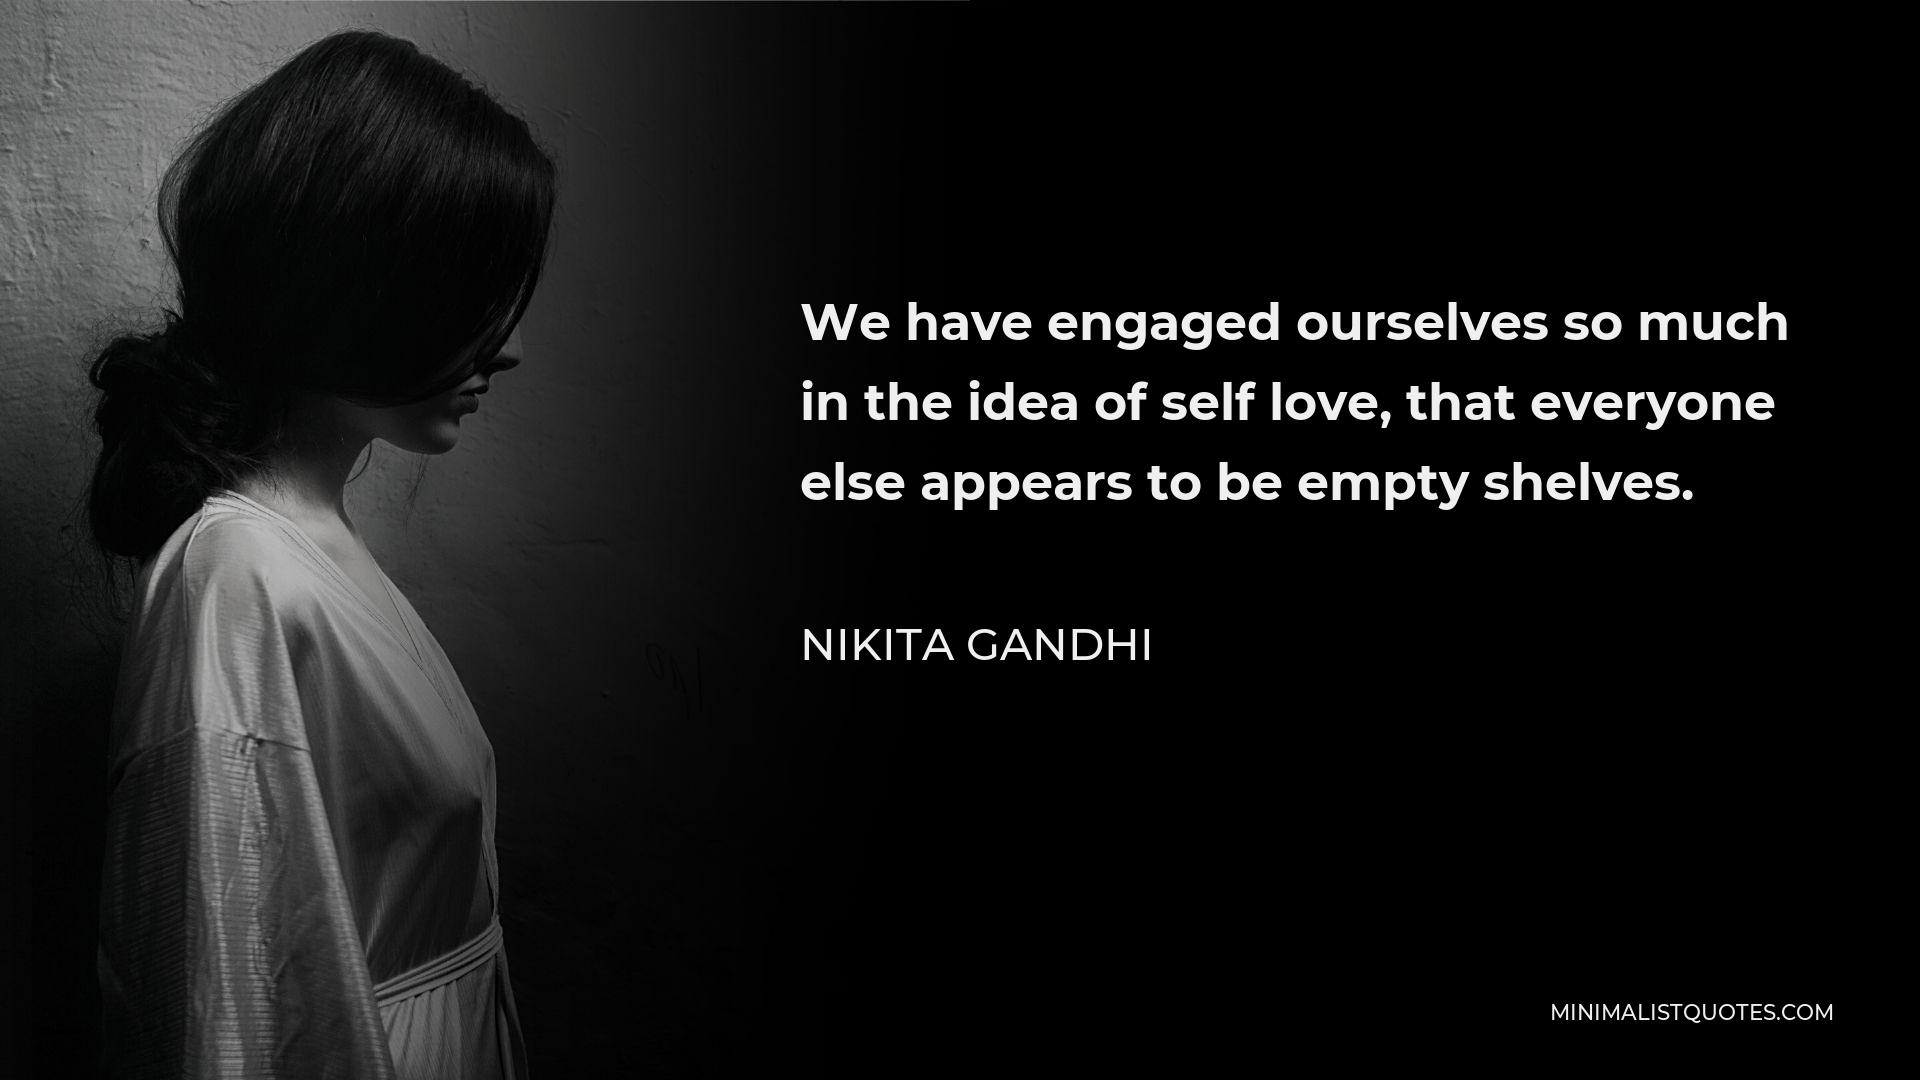 Nikita Gandhi Quote - We have engaged ourselves so much in the idea of self love, that everyone else appears to be empty shelves.